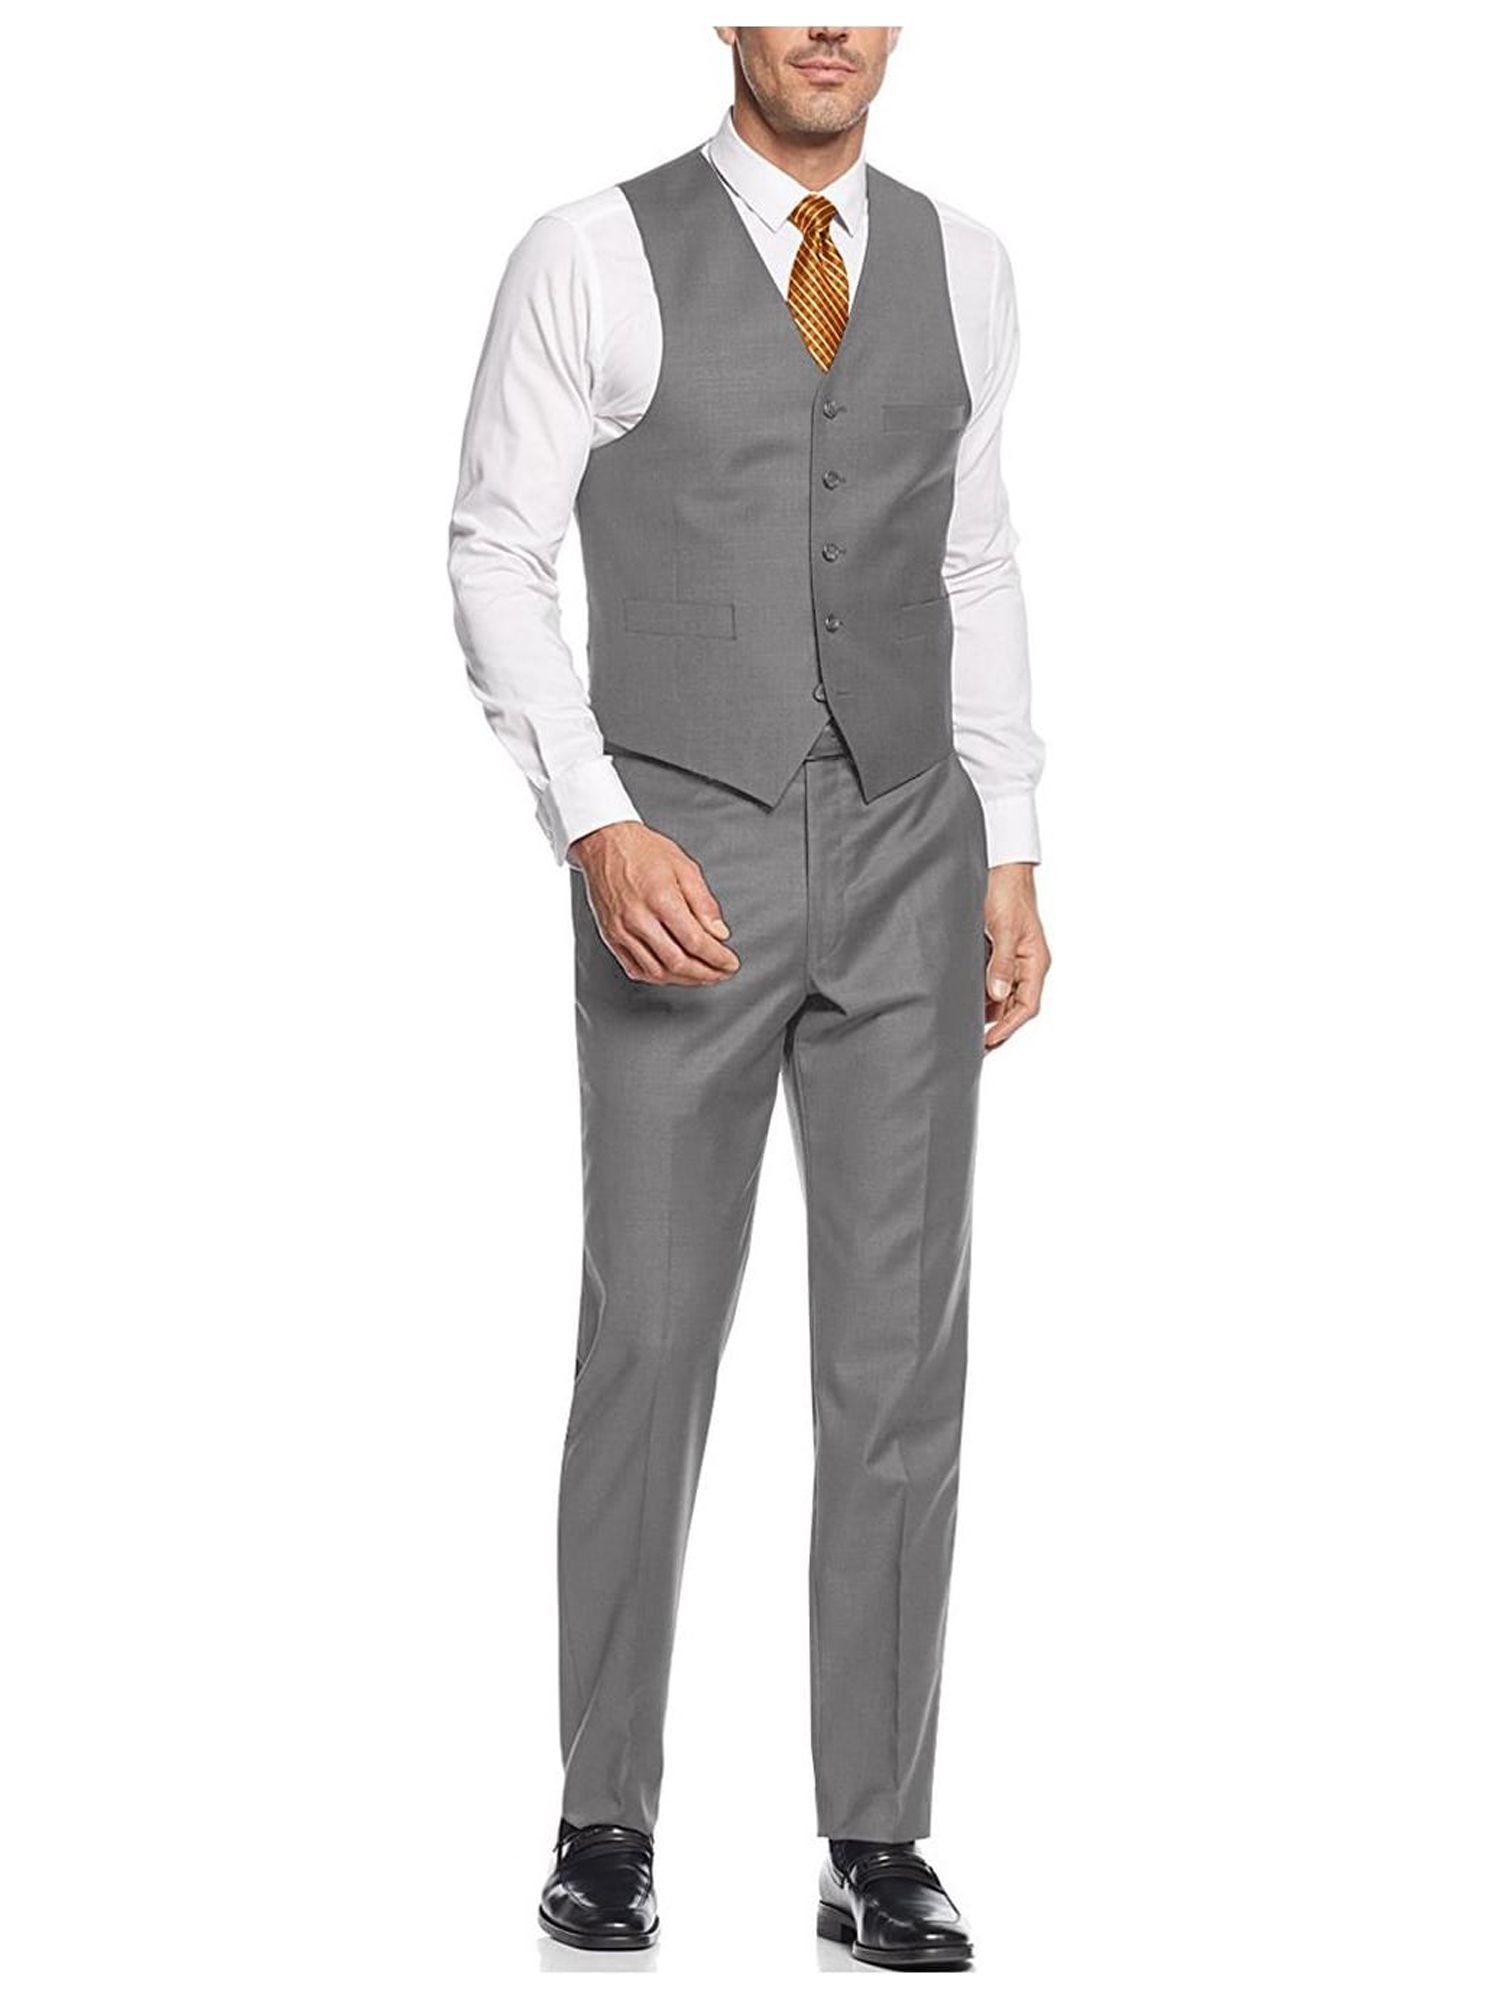 Mens Ticket Pocket Three Piece Gray Modern Fit Vested Suit - image 3 of 3